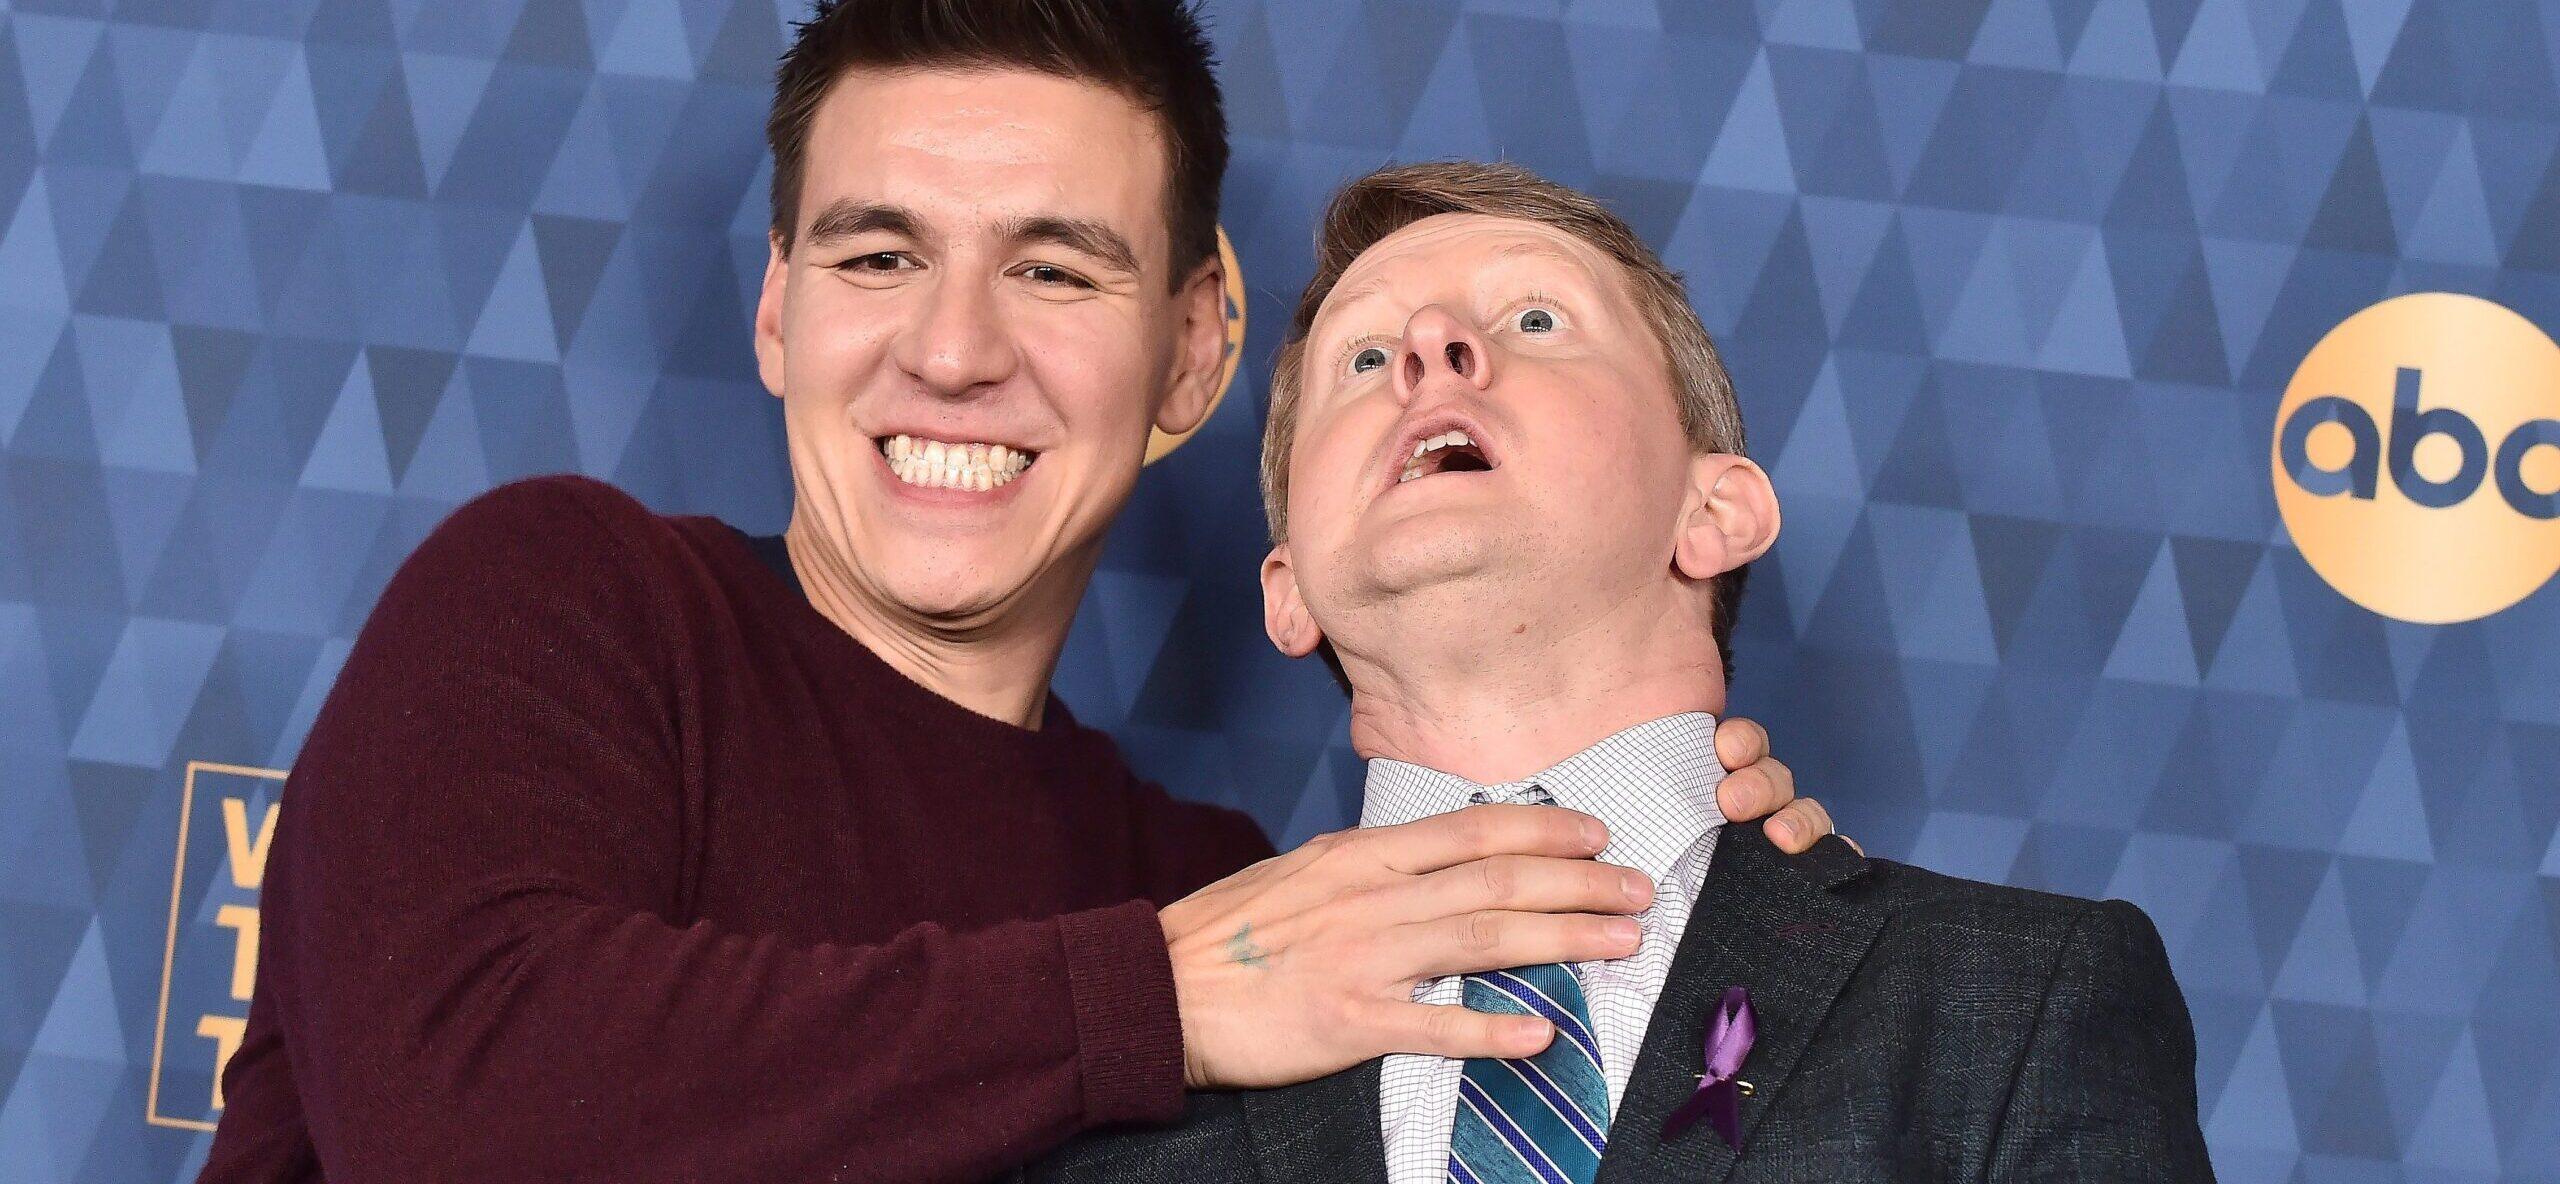 ‘Jeopardy!’ Host Ken Jennings Reveals Why He Won’t Give James Holzhauer A Rematch